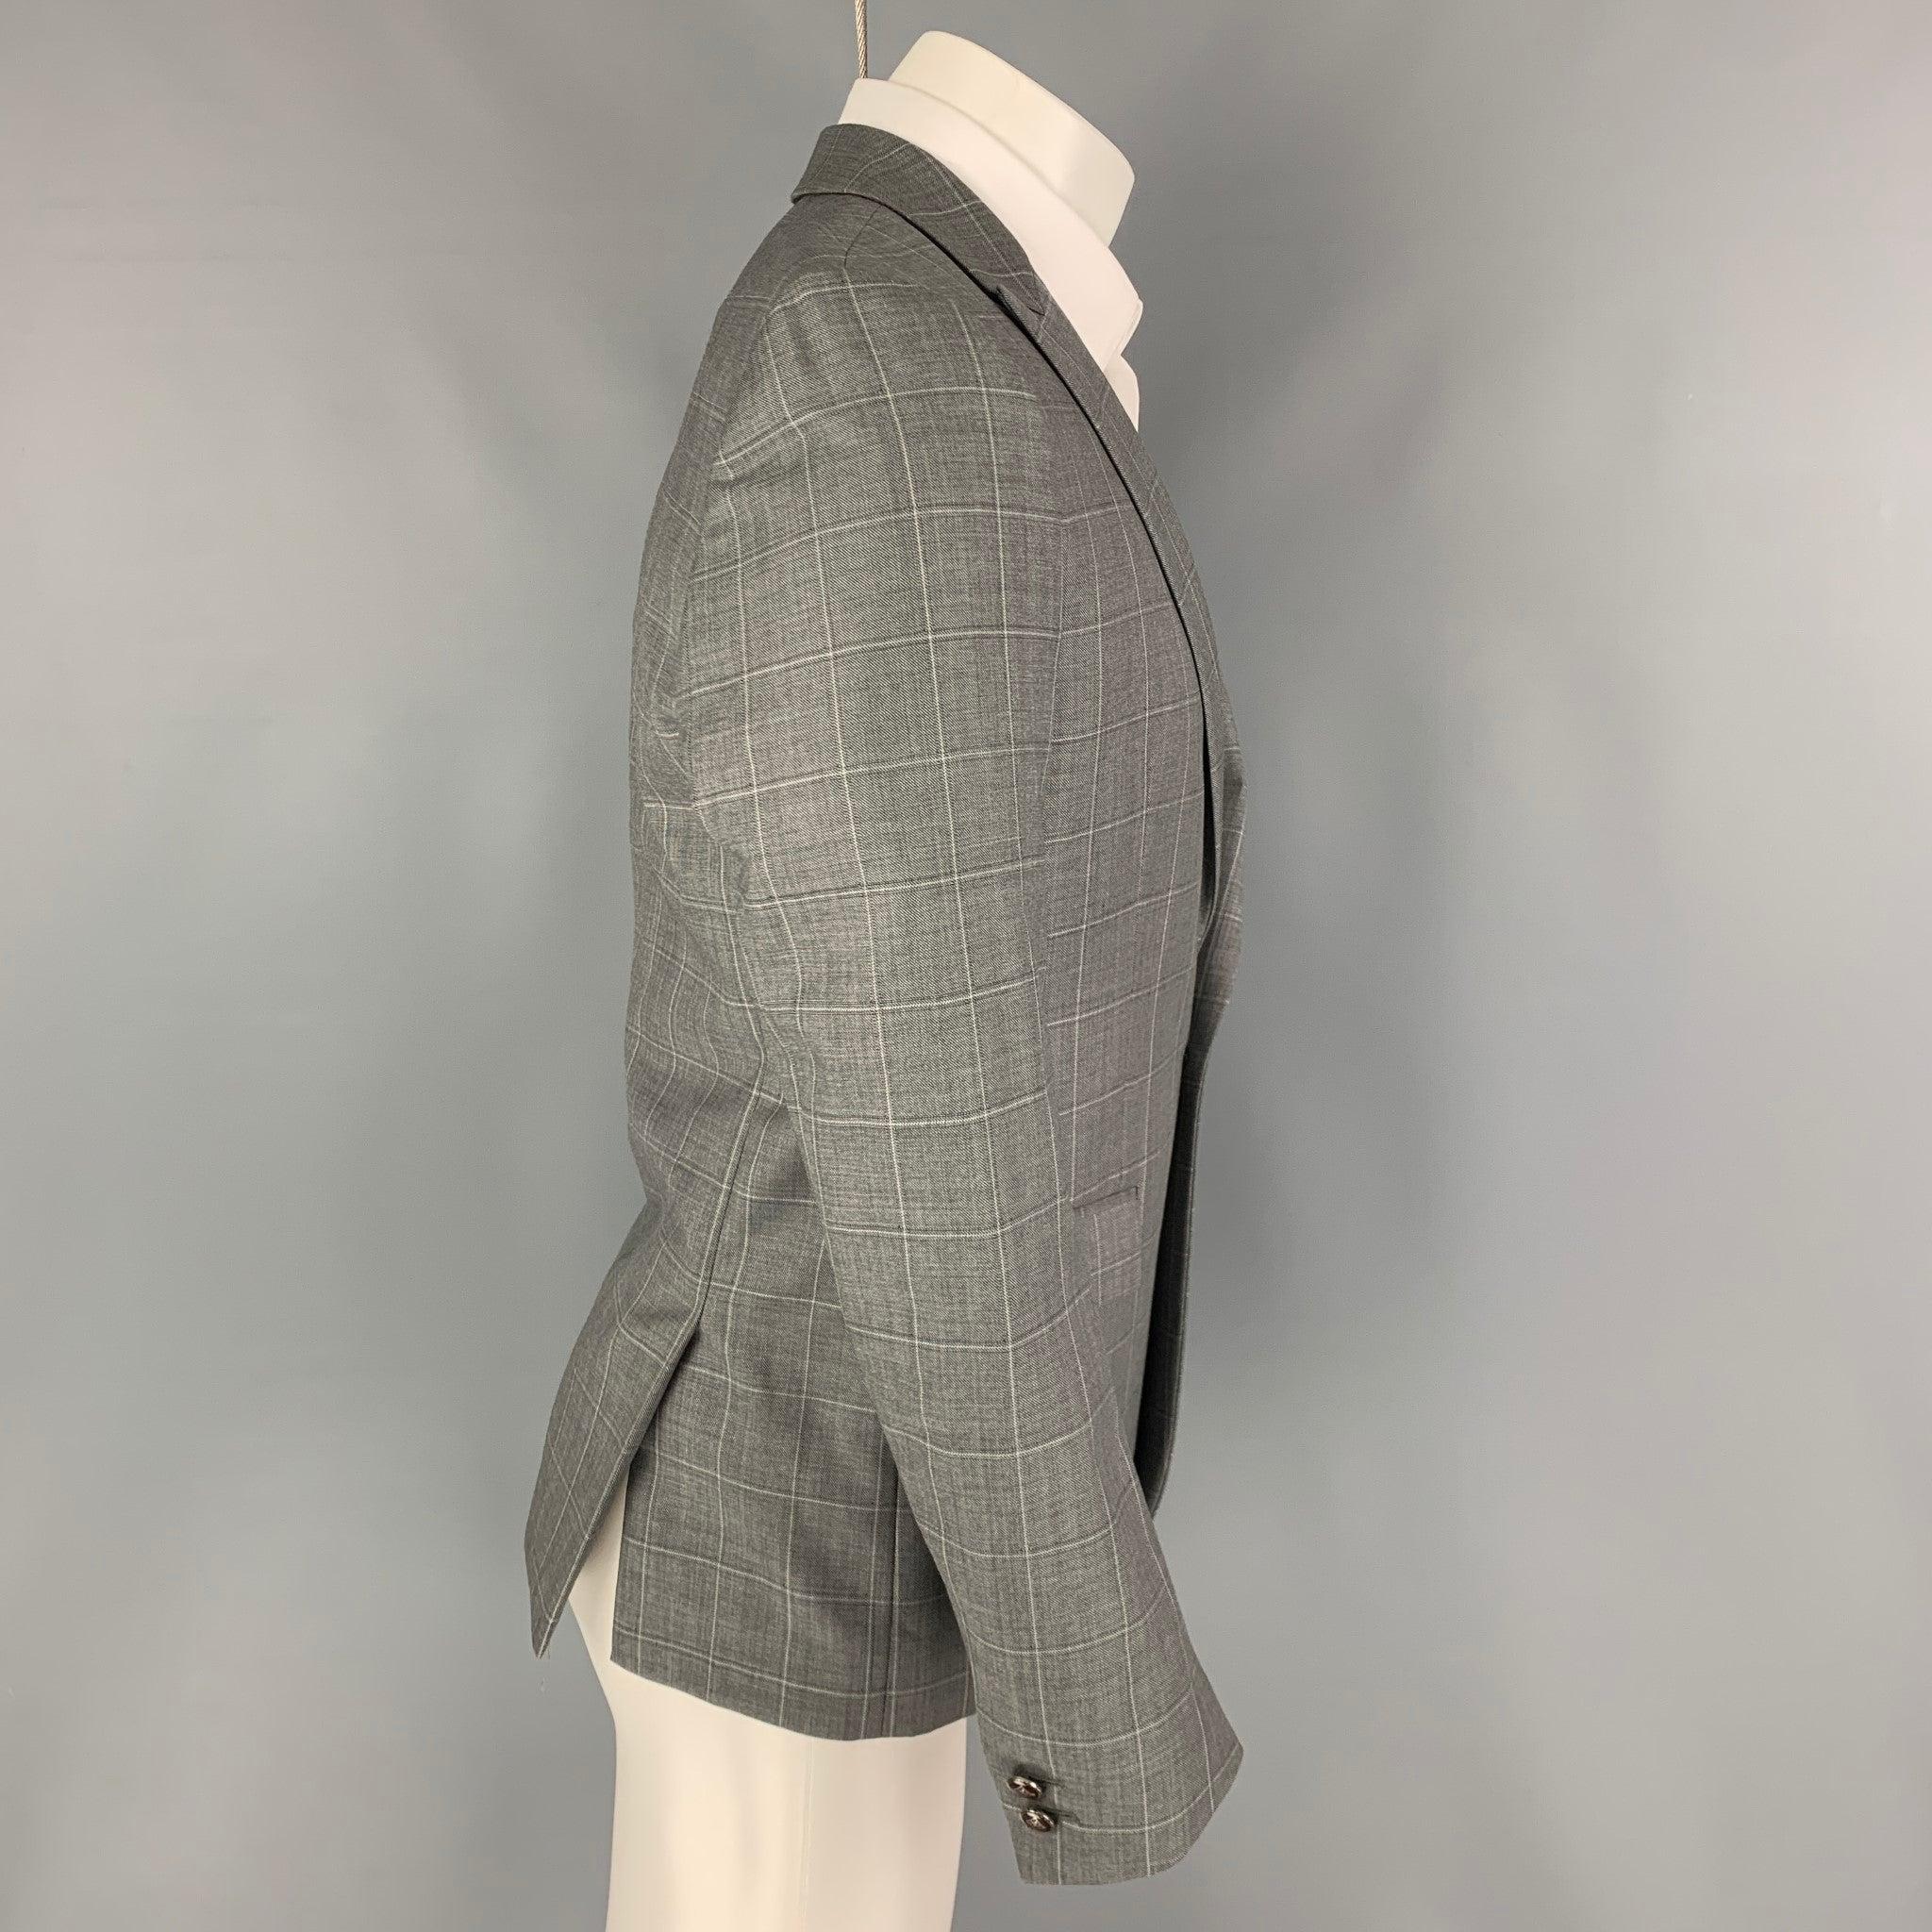 THE KOOPLES sport coat comes in a grey window pane with a full liner featuring a peak lapel, flap pockets, double back vent, and a single button closure.
Excellent
Pre-Owned Condition. 

Marked:   46 

Measurements: 
 
Shoulder: 17 inches Chest: 36